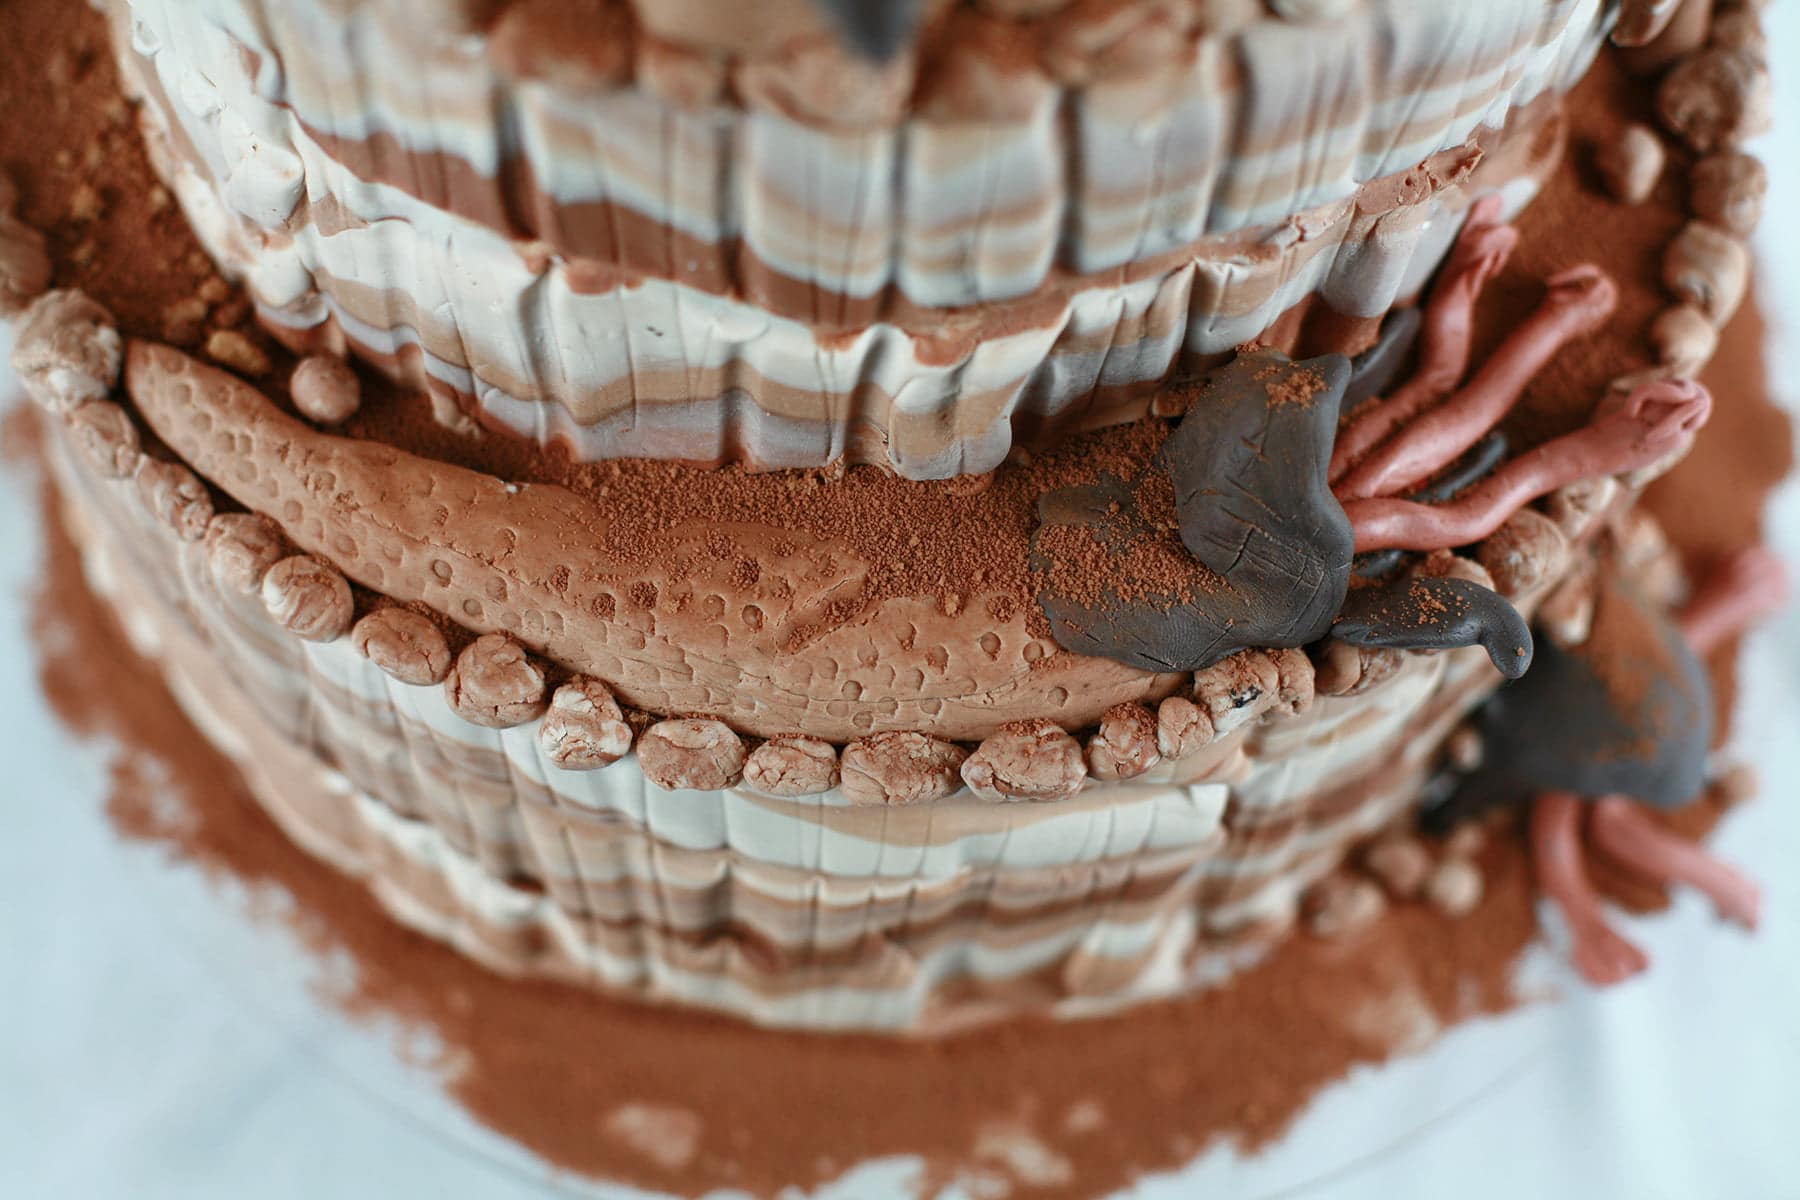 Detail photos of a "Tremors" themed wedding cake, almost entirely decorated in various shades of chocolate fondant.